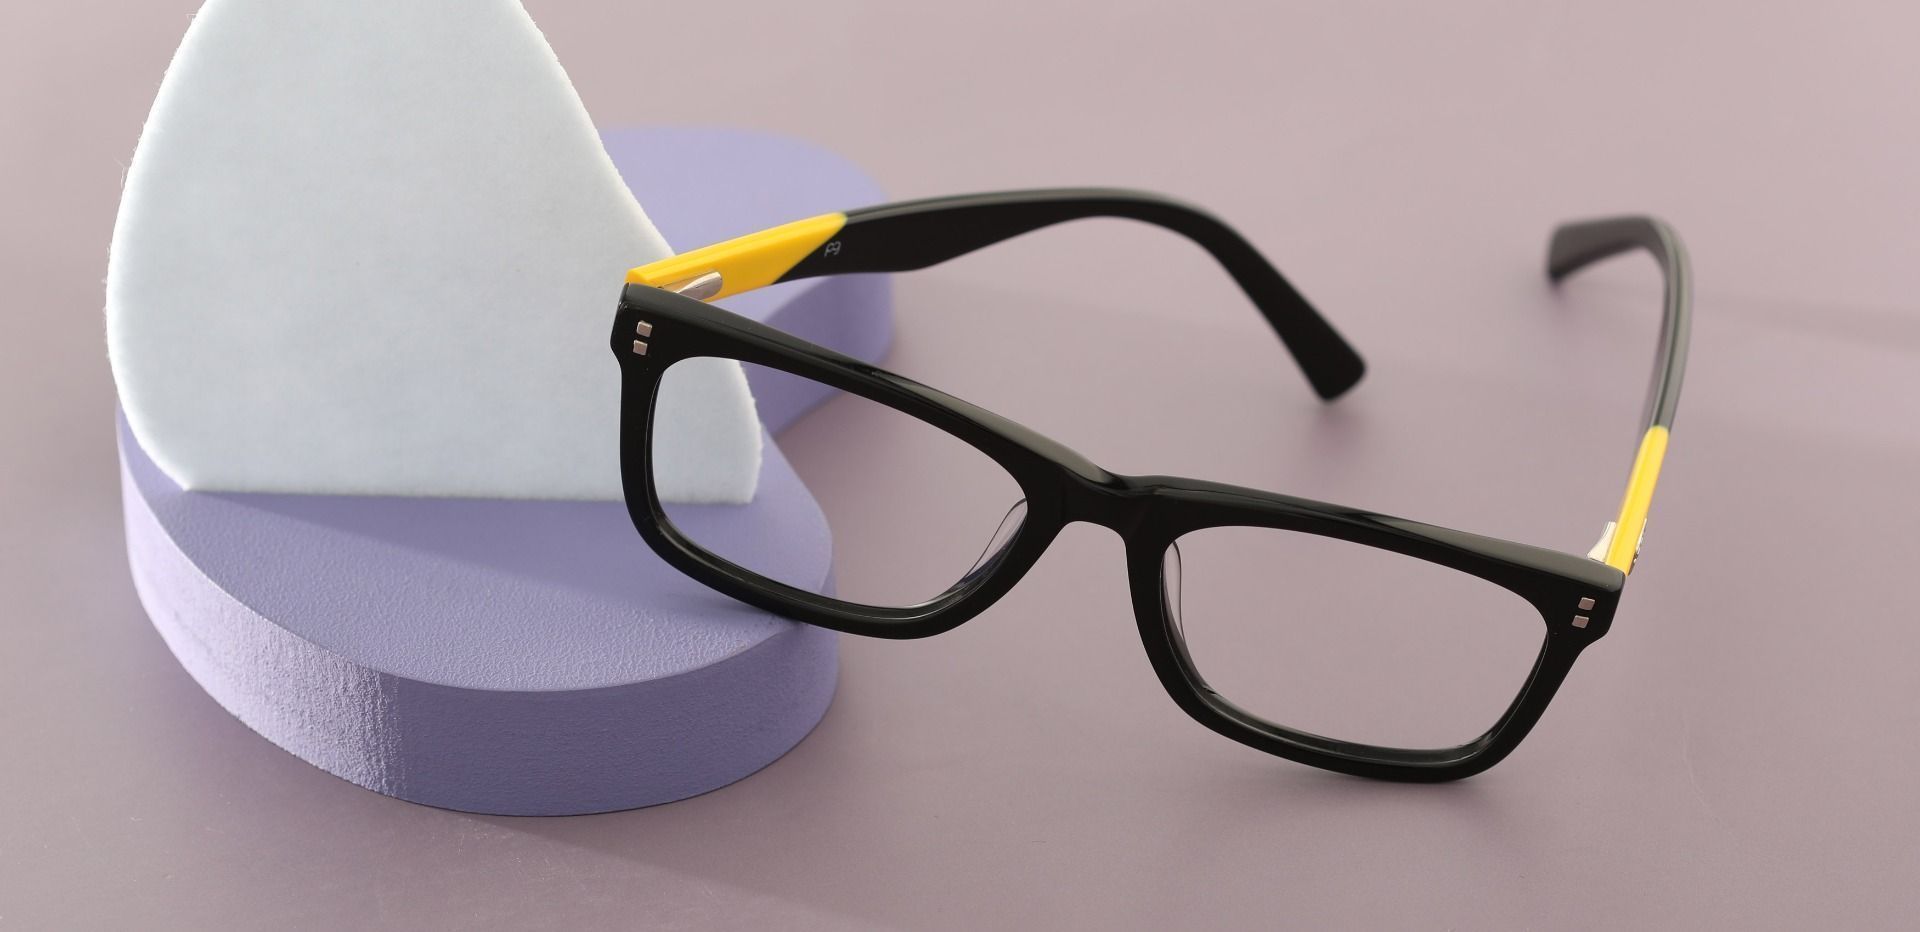 Liberty Rectangle Reading Glasses - The Frame Is Black And Gold